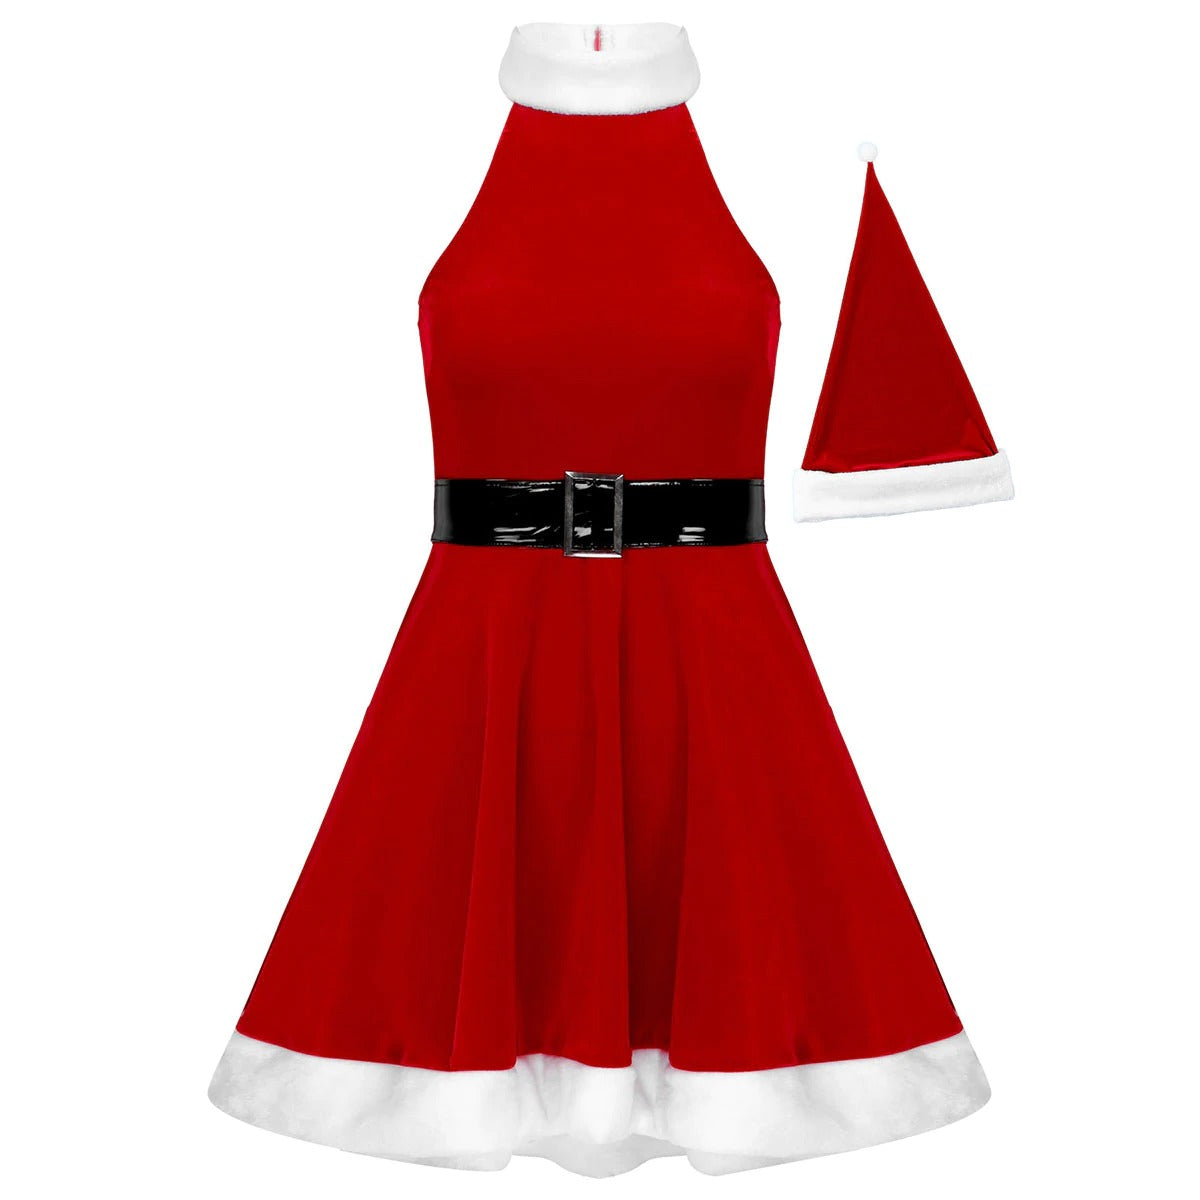 Santa Xmas Women's Cosplay Costume / Fashion Party Dress with Hat and Belt for Dress Up - HARD'N'HEAVY